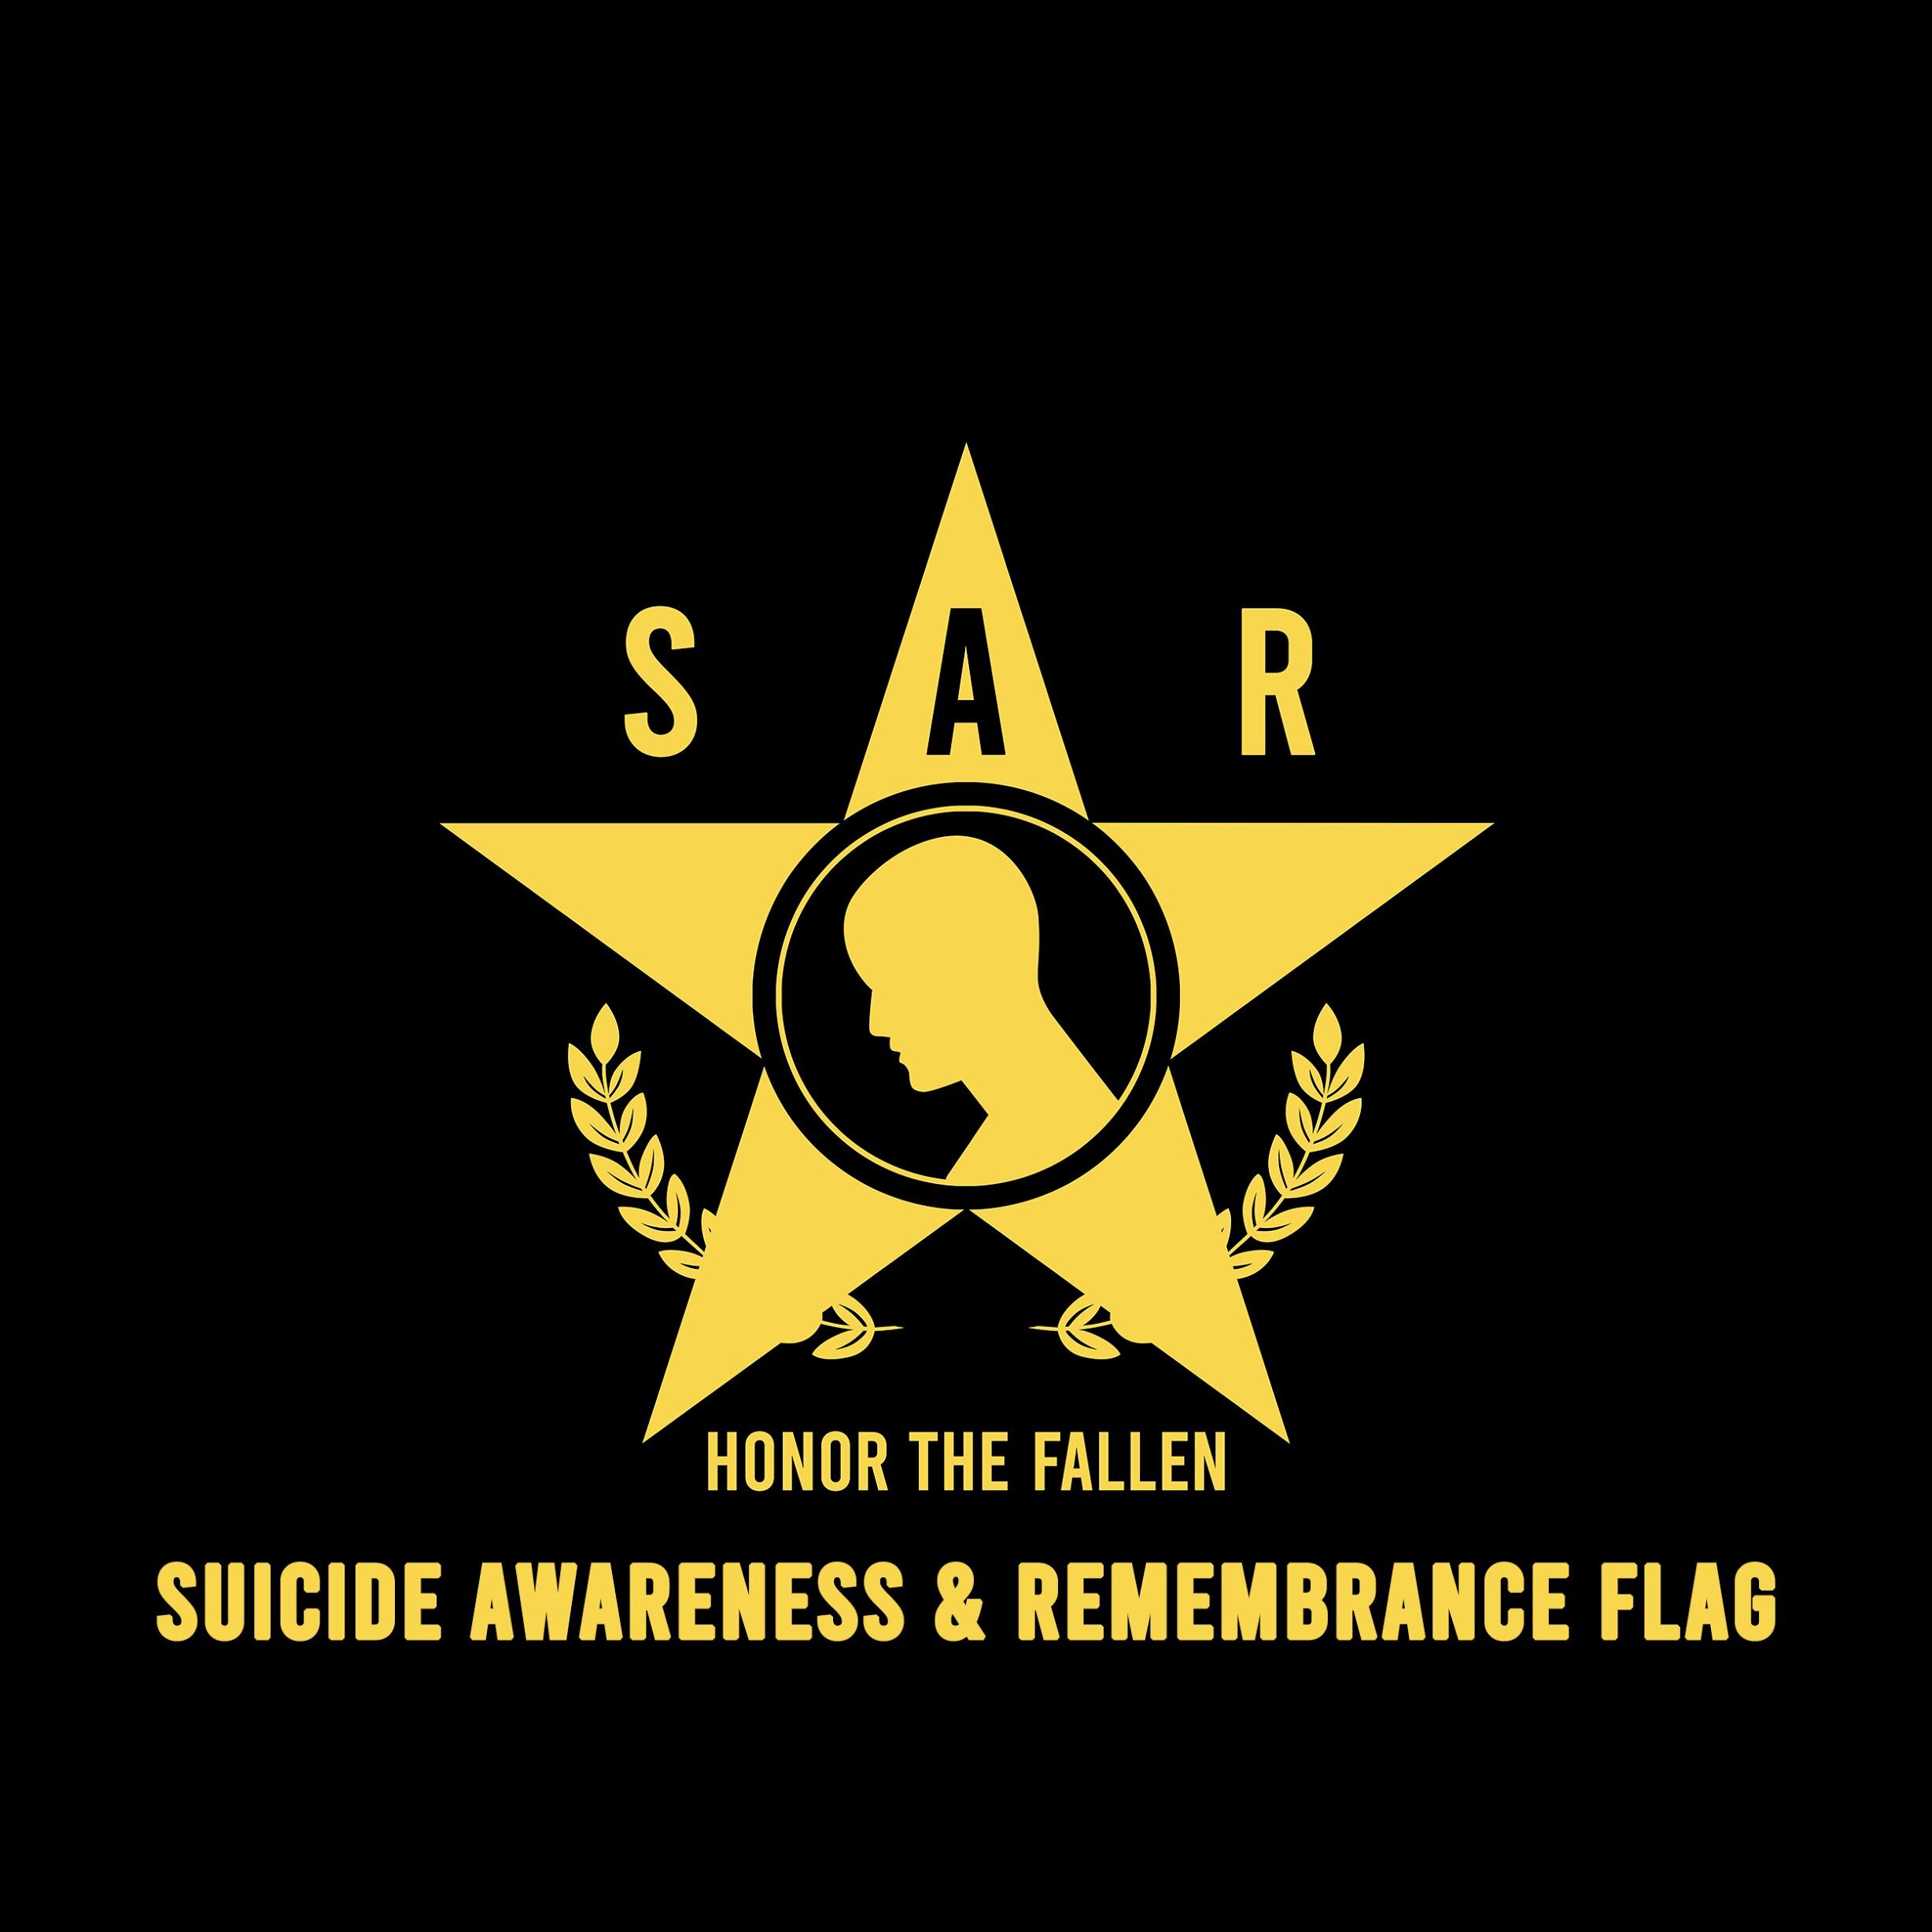 This is the S-A-R Flag